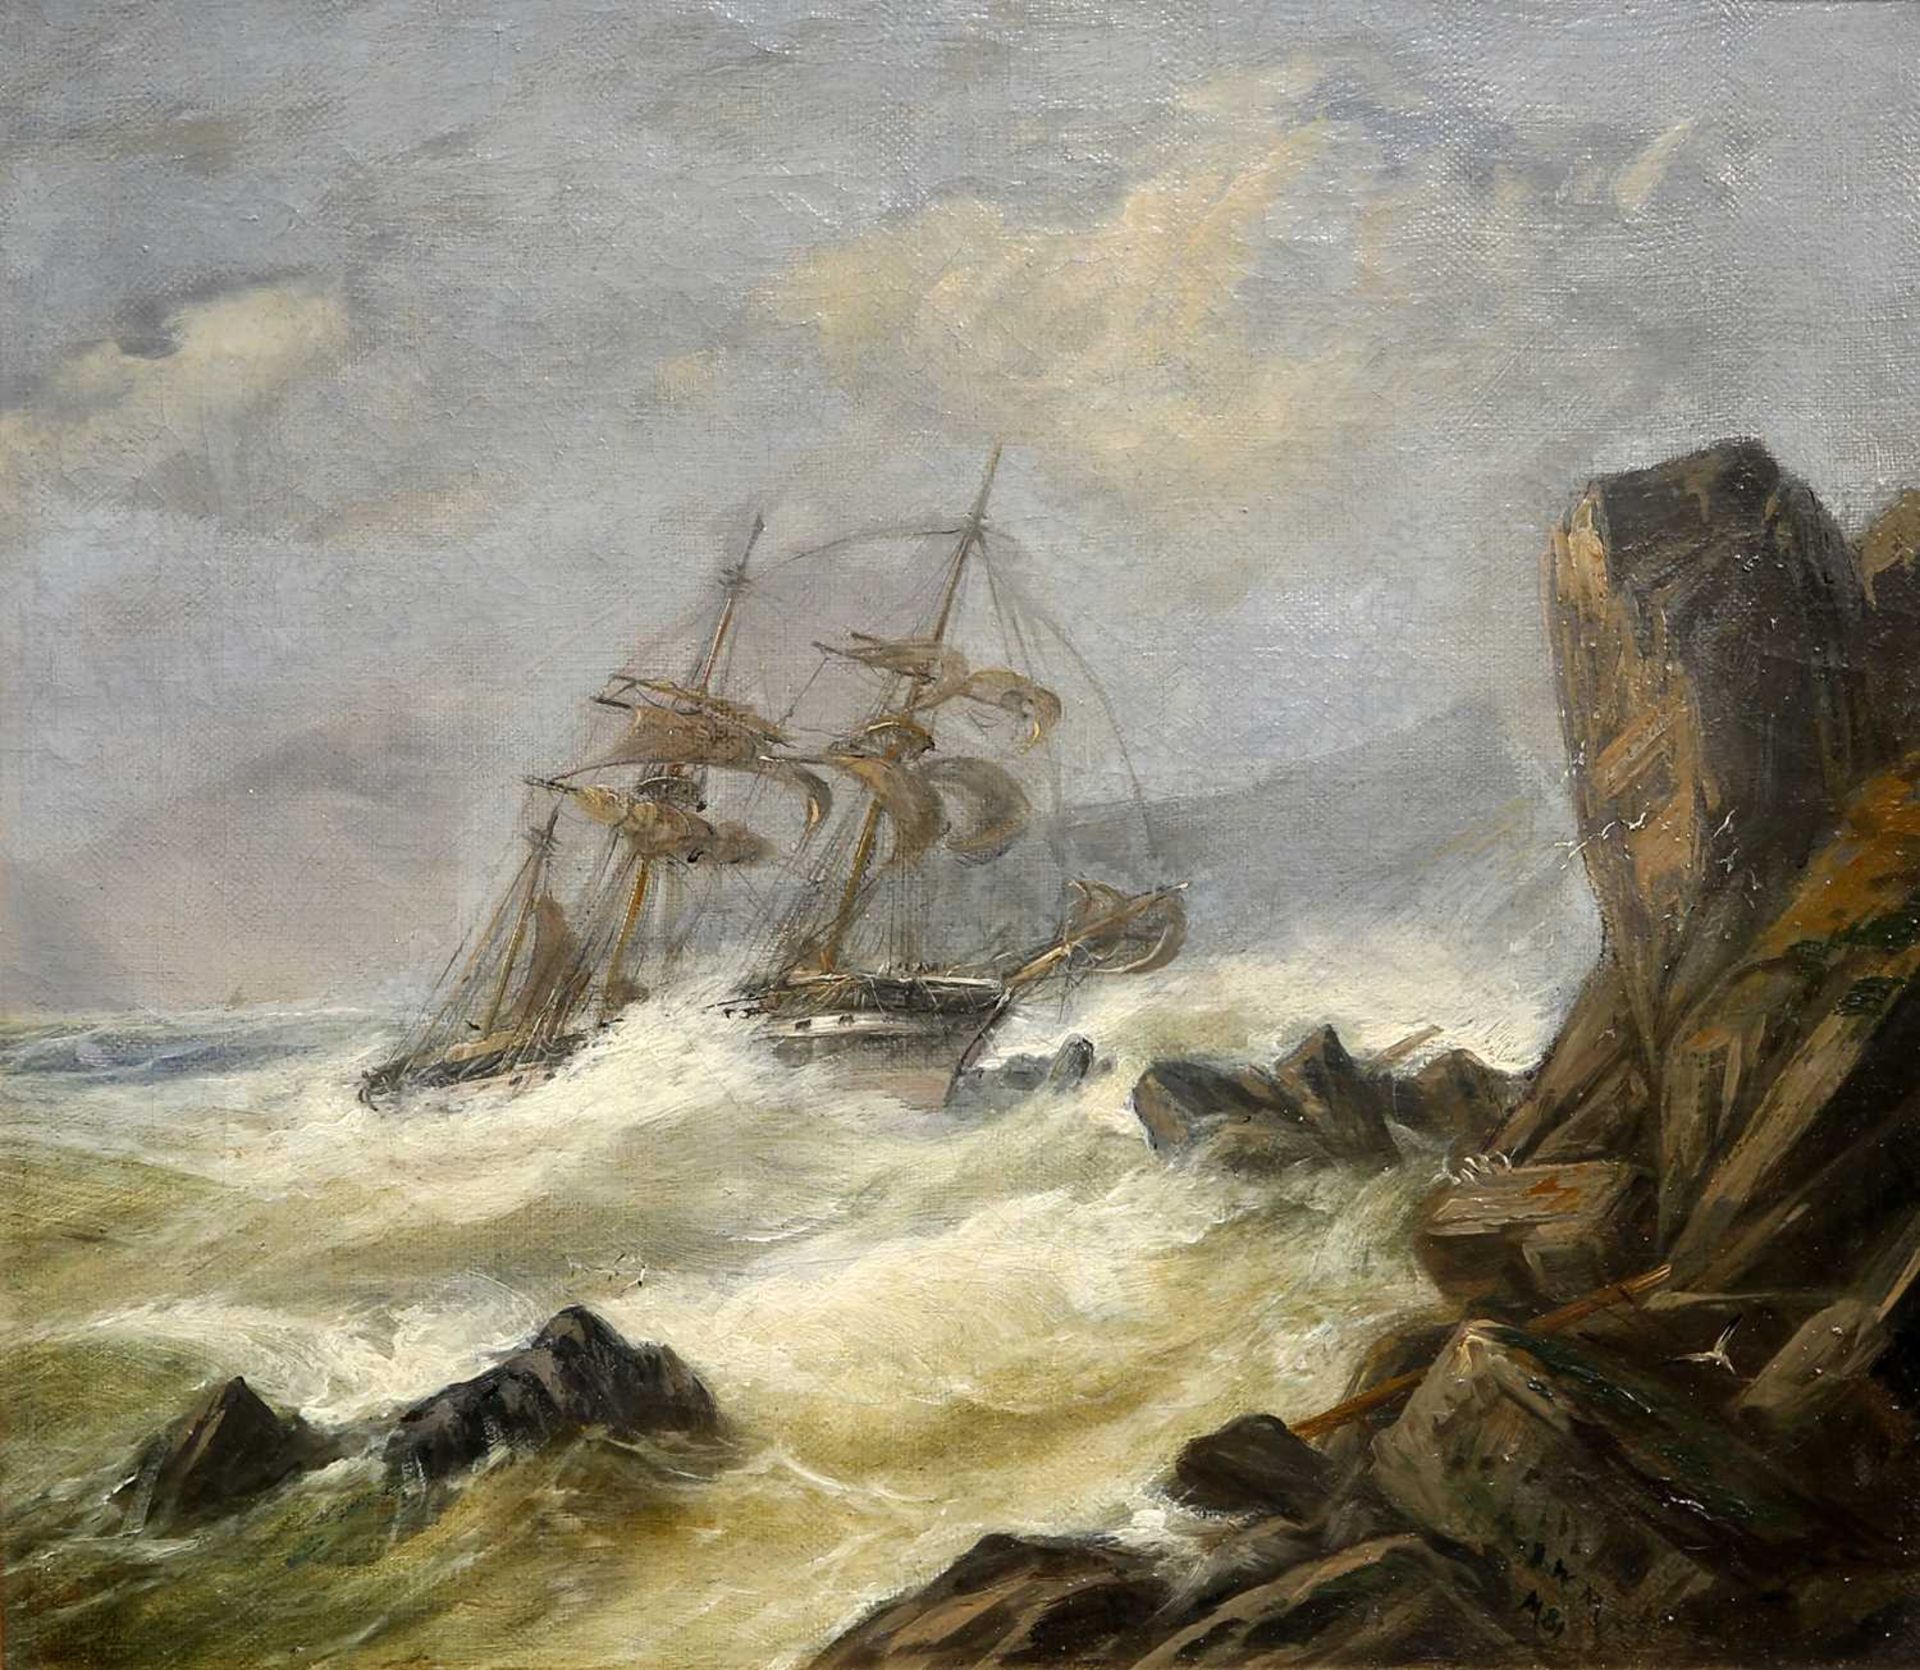 WILLIAM MITCHELL OF MARYPORT (1806-1900) MERCHANT SHIP WRECKED OFF THE COAST